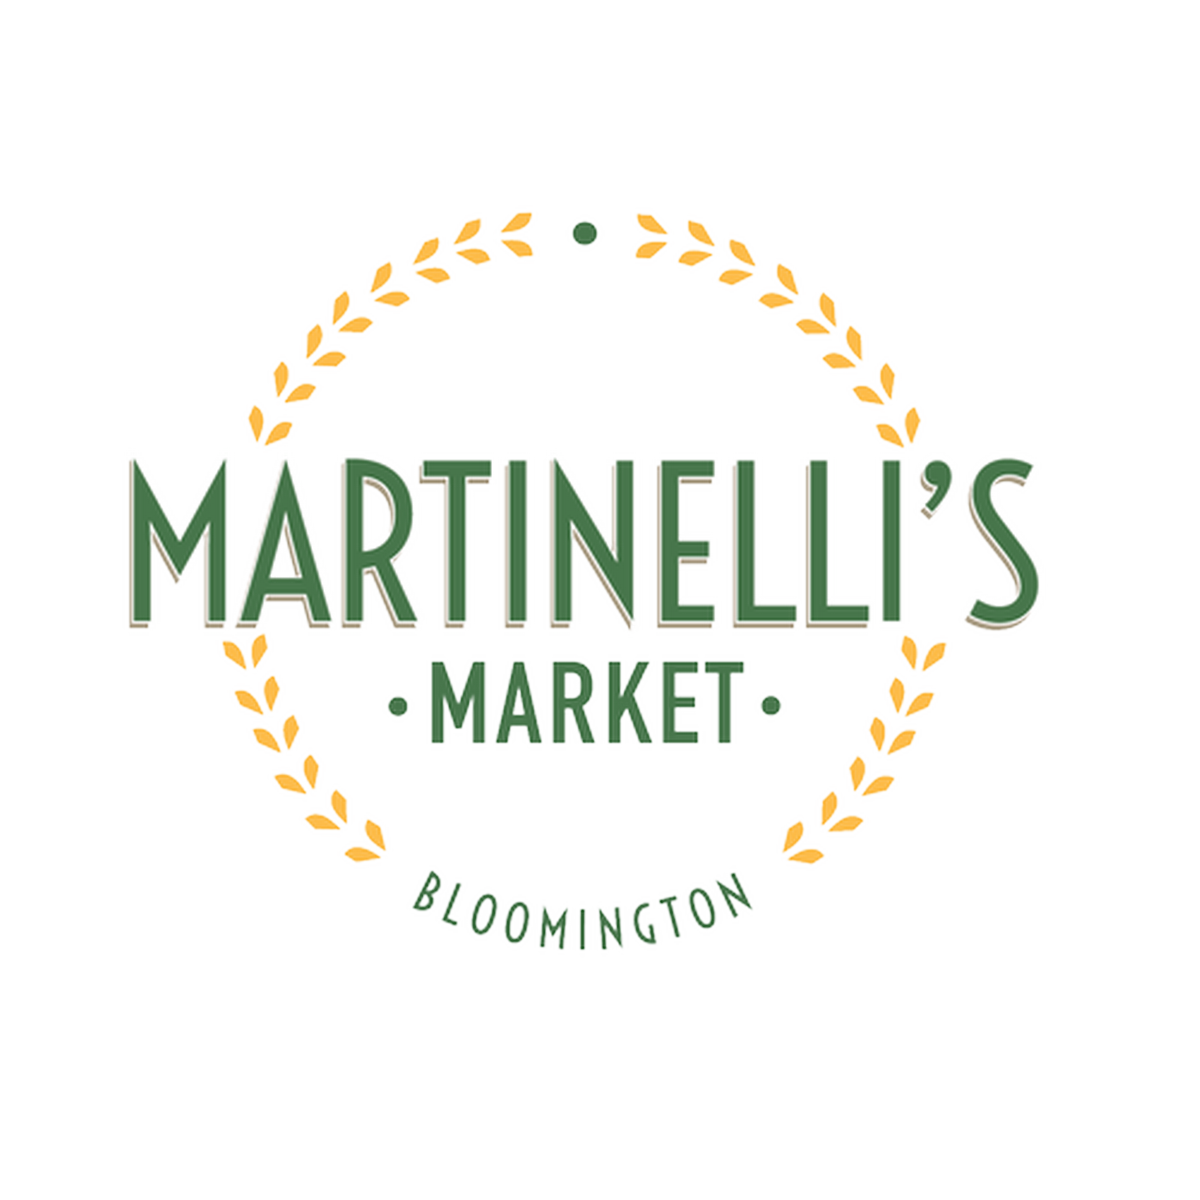 2022 August 5th MCCC Ribbon Cutting Martinelli's Market Aug 5, 2022